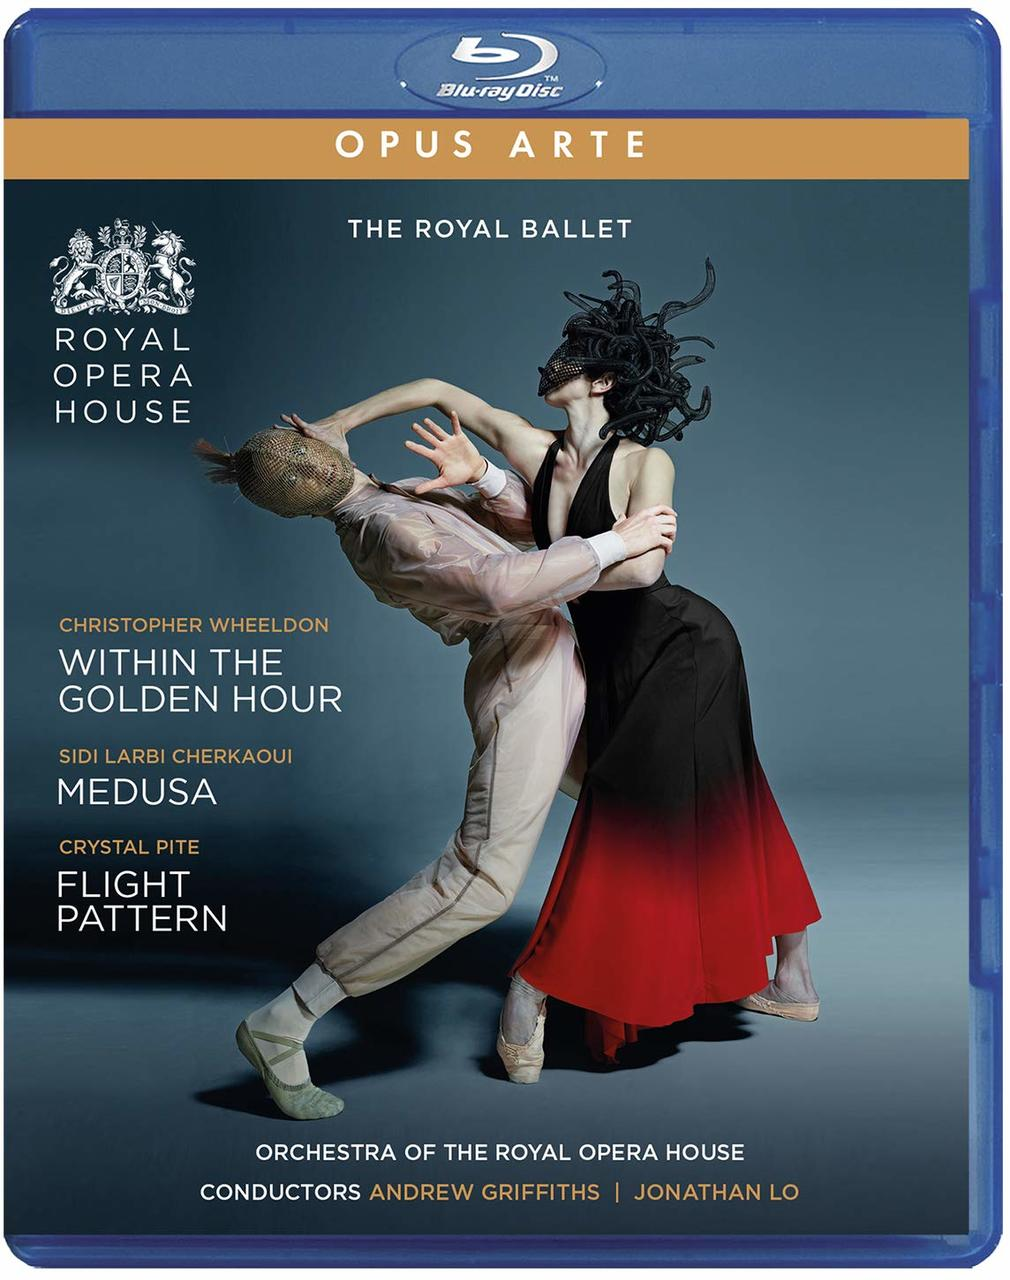 The MEDUSA HOUR Opera House FLIGH WITHIN Of - - (Blu-ray) Royal GOLDEN THE Jonathan Orchestra Lo,